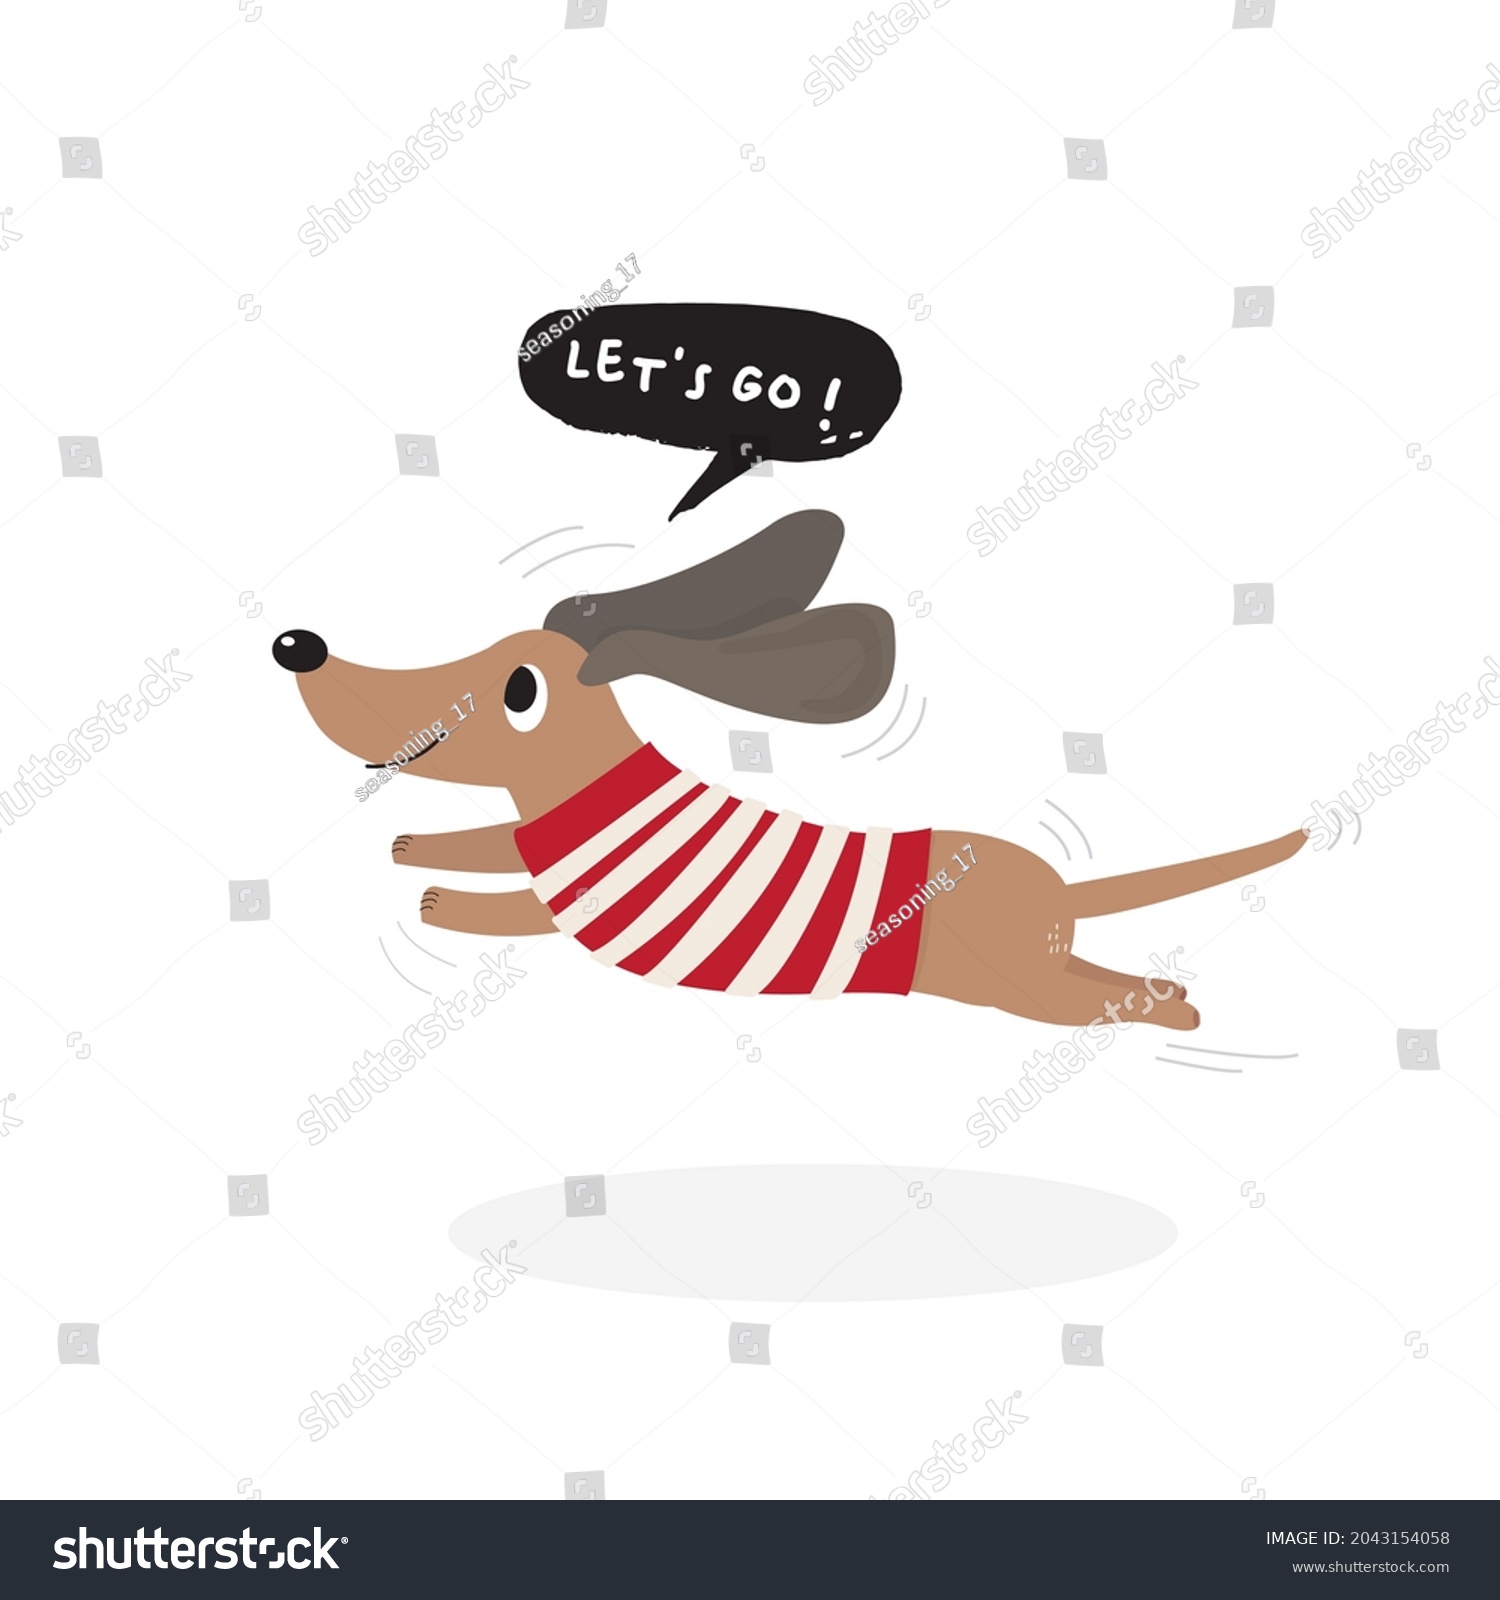 SVG of Cartoon dachshunds on white background,Cartoon happy dachshund,Flat vector illustration for prints, clothing, packaging and postcards, cute dog
 svg